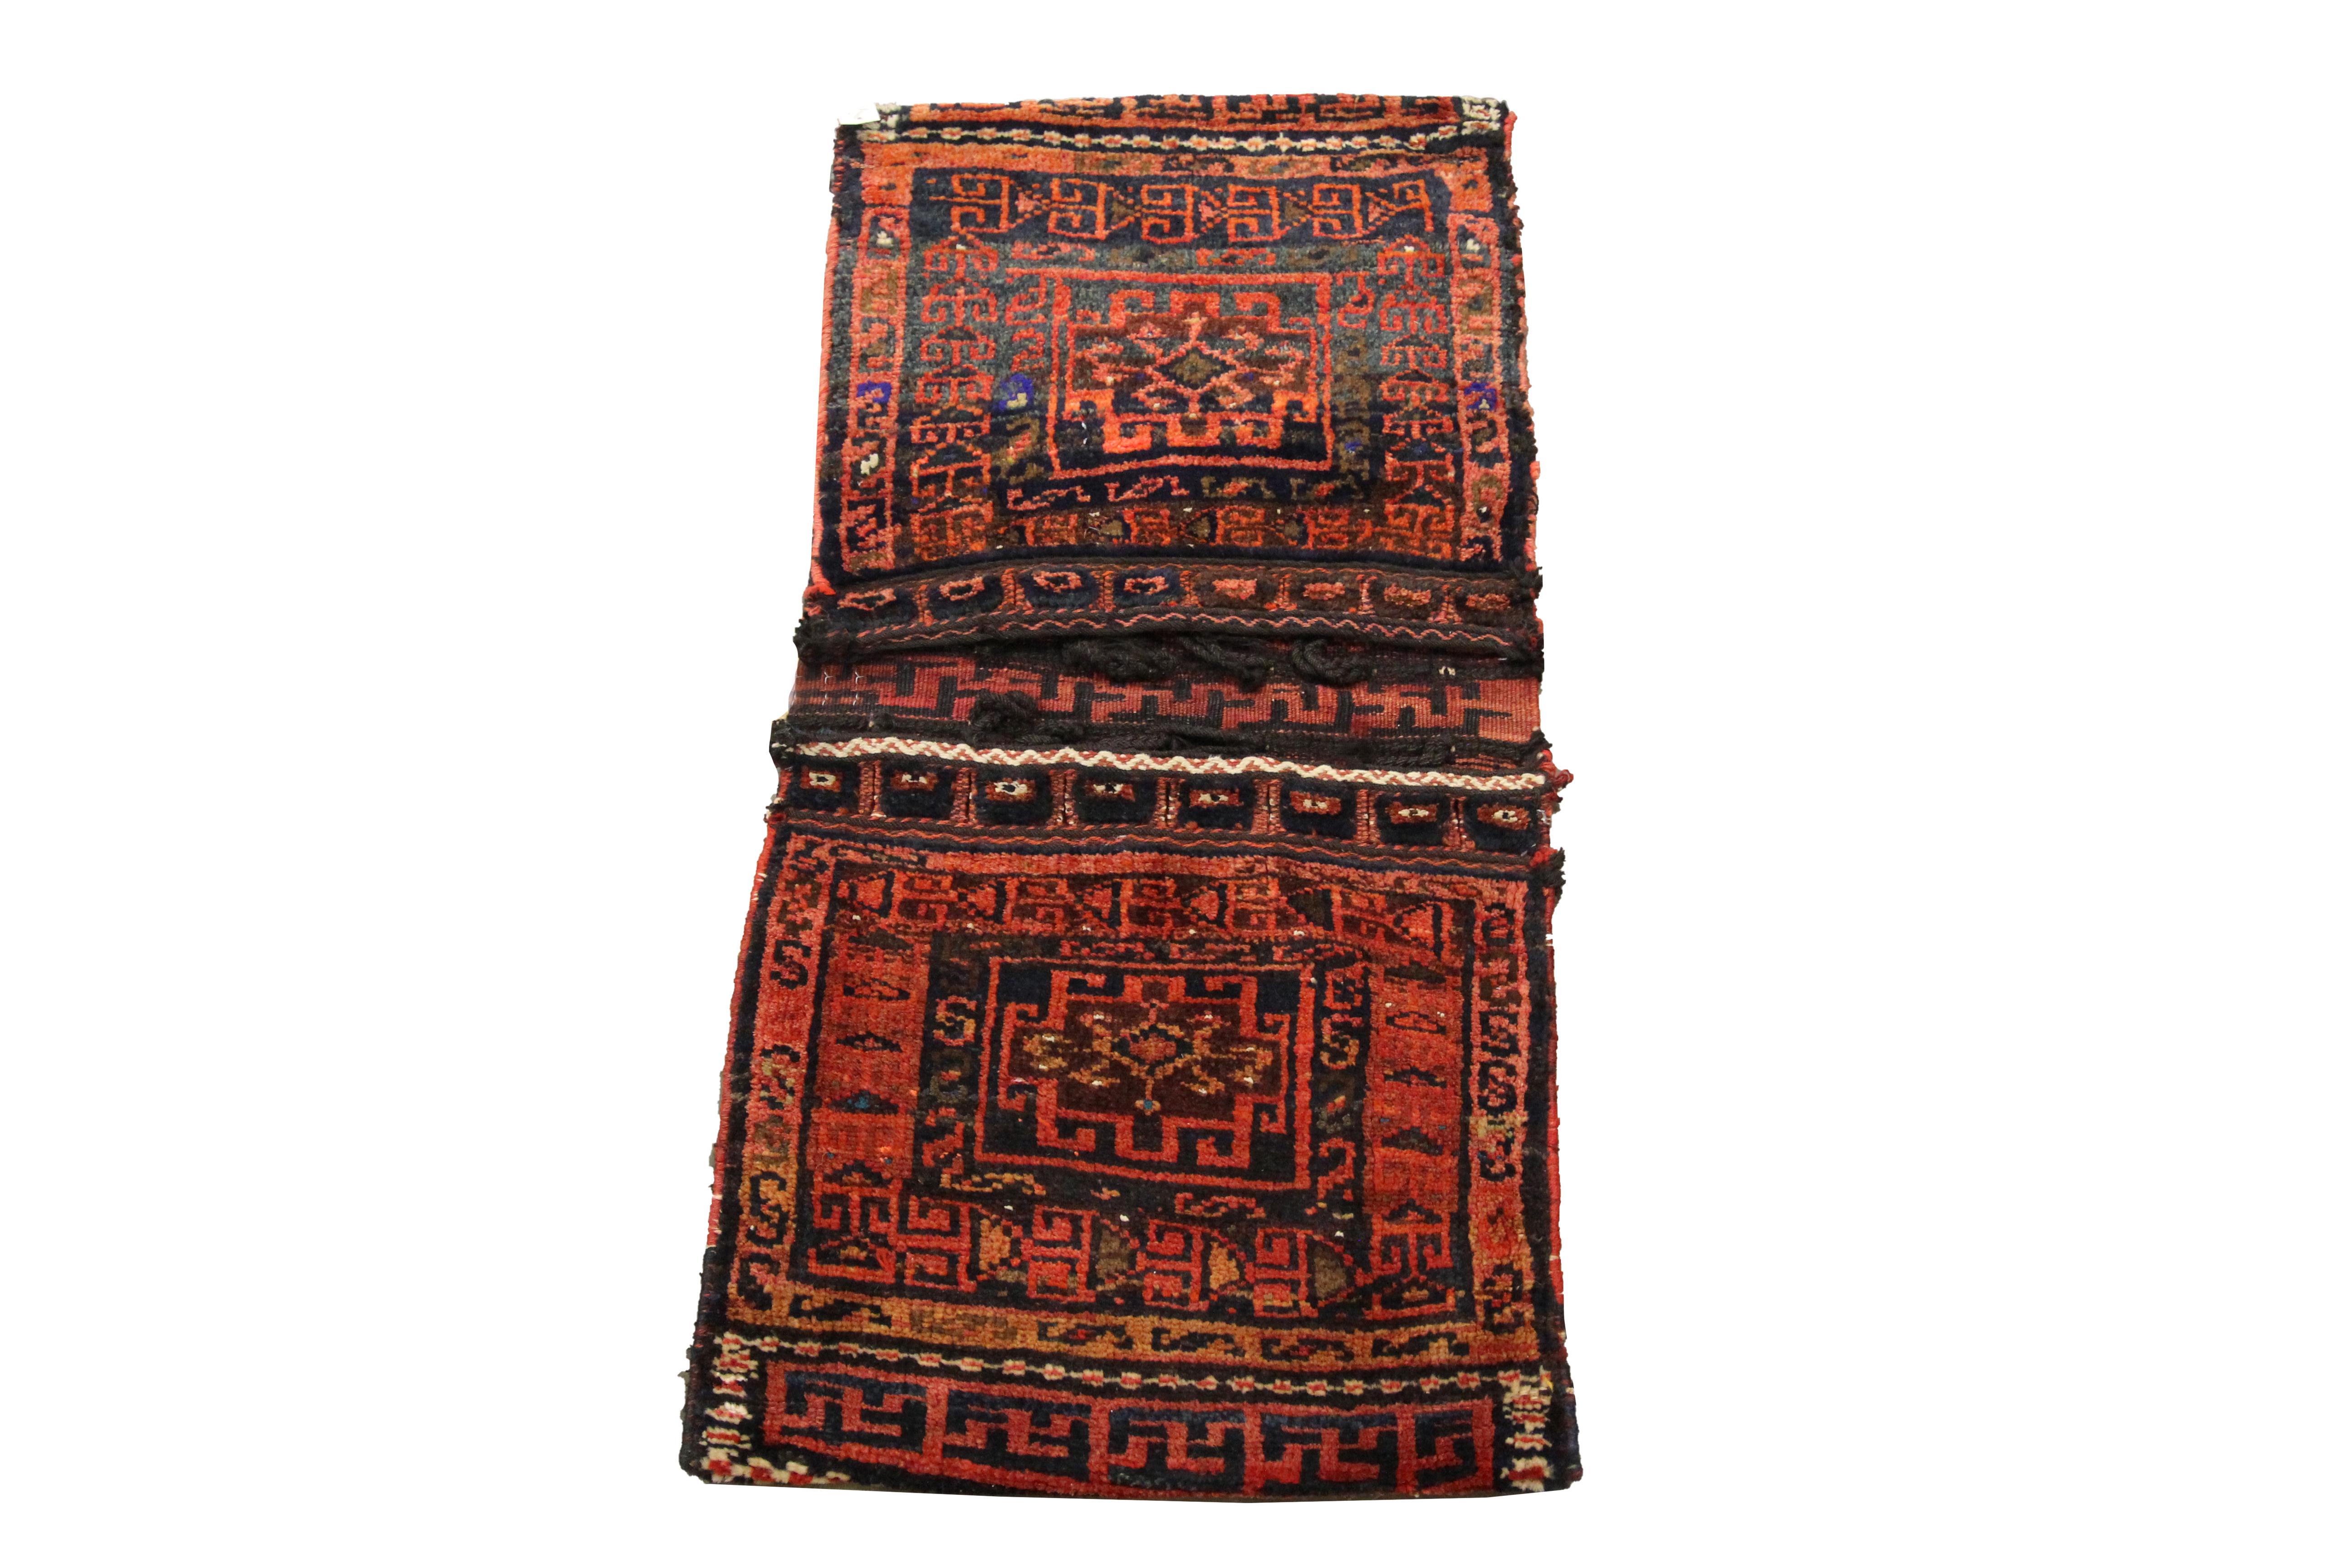 This handwoven textile is an extremely rare Khorjin rug/ saddle bag woven in the early 19th century. Saddlebags were traditionally used as storage which nomadic travellers used upon horseback. The design features a traditional geometric pattern